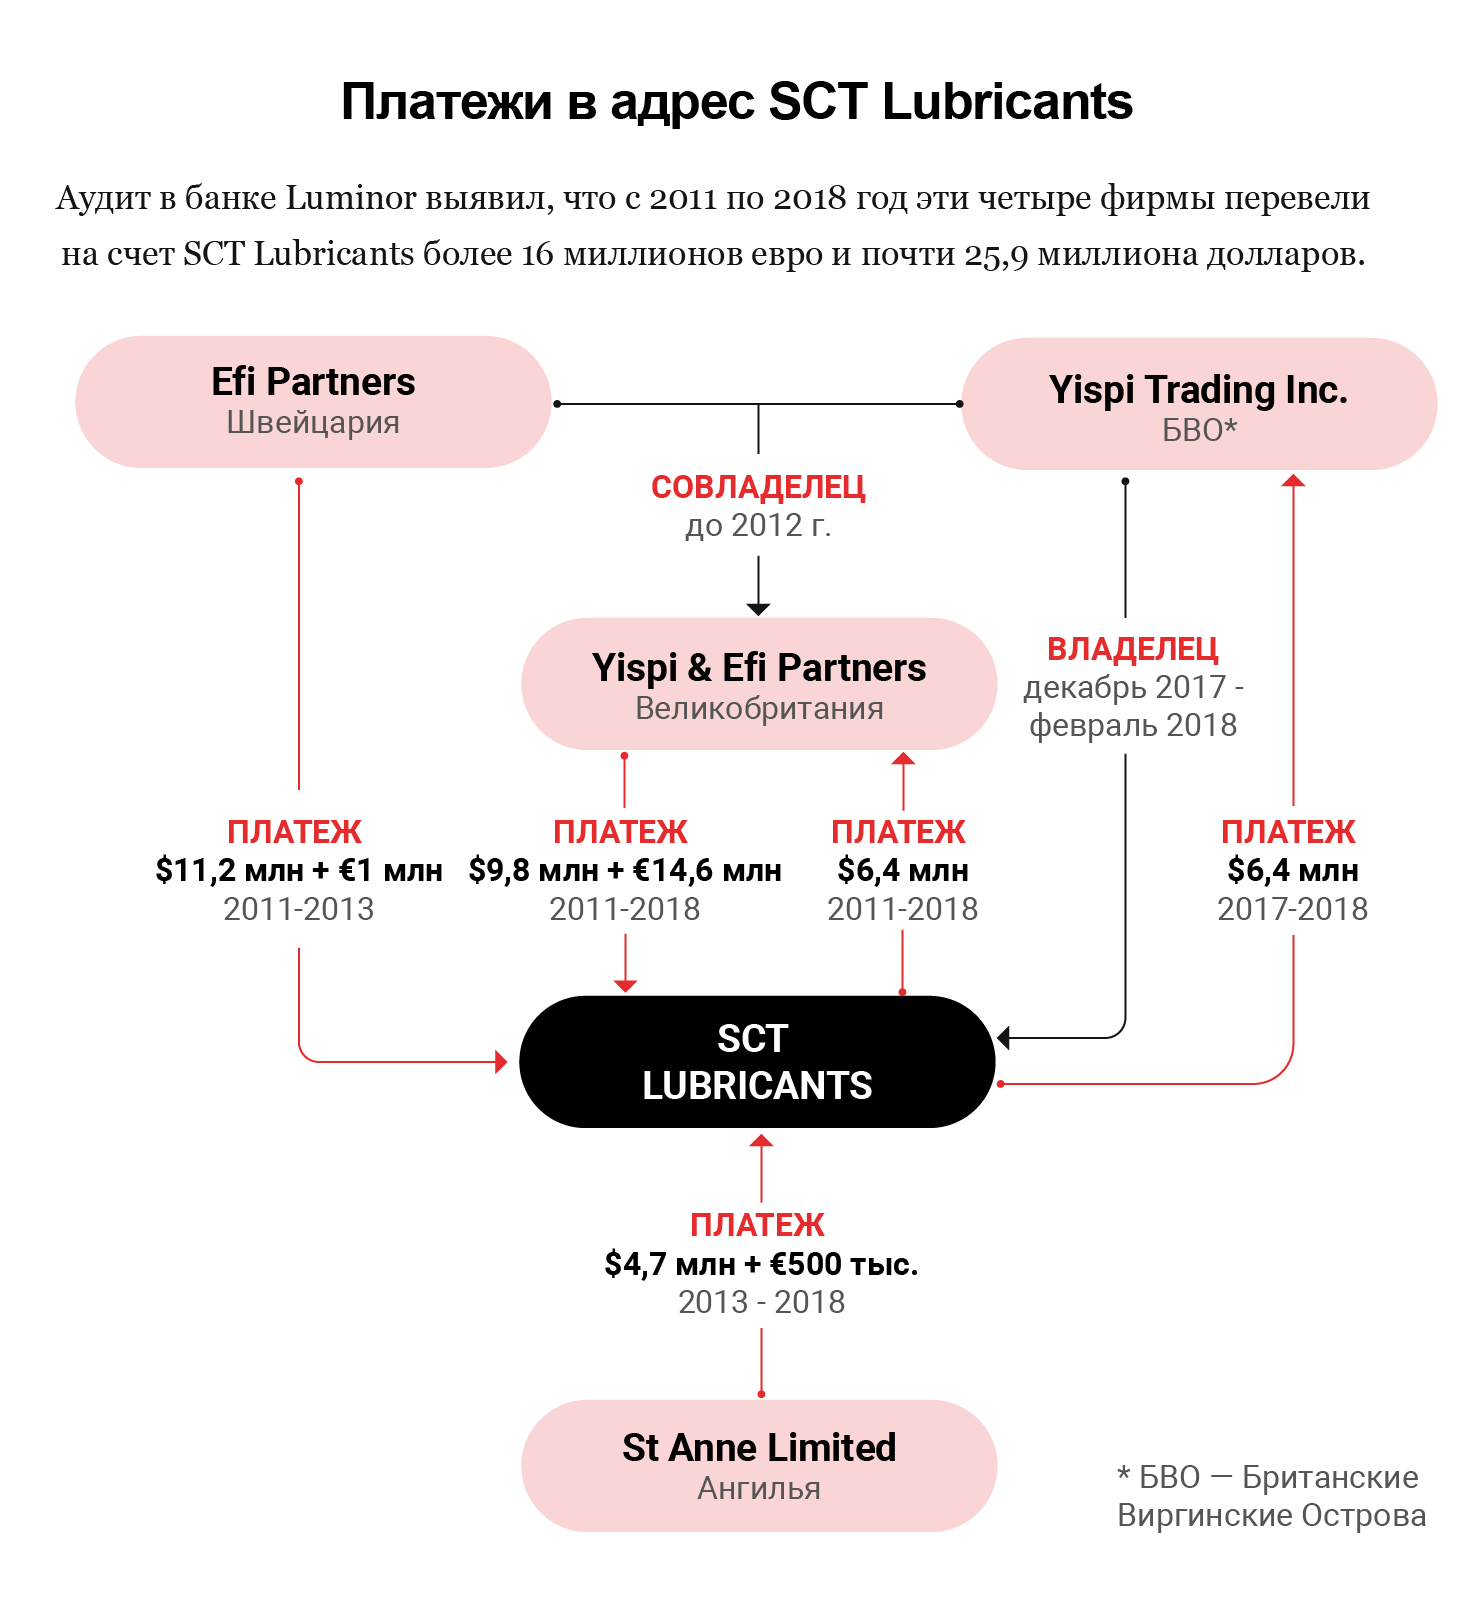 investigations/SCT-Lubricants-Infographic-RUS.png